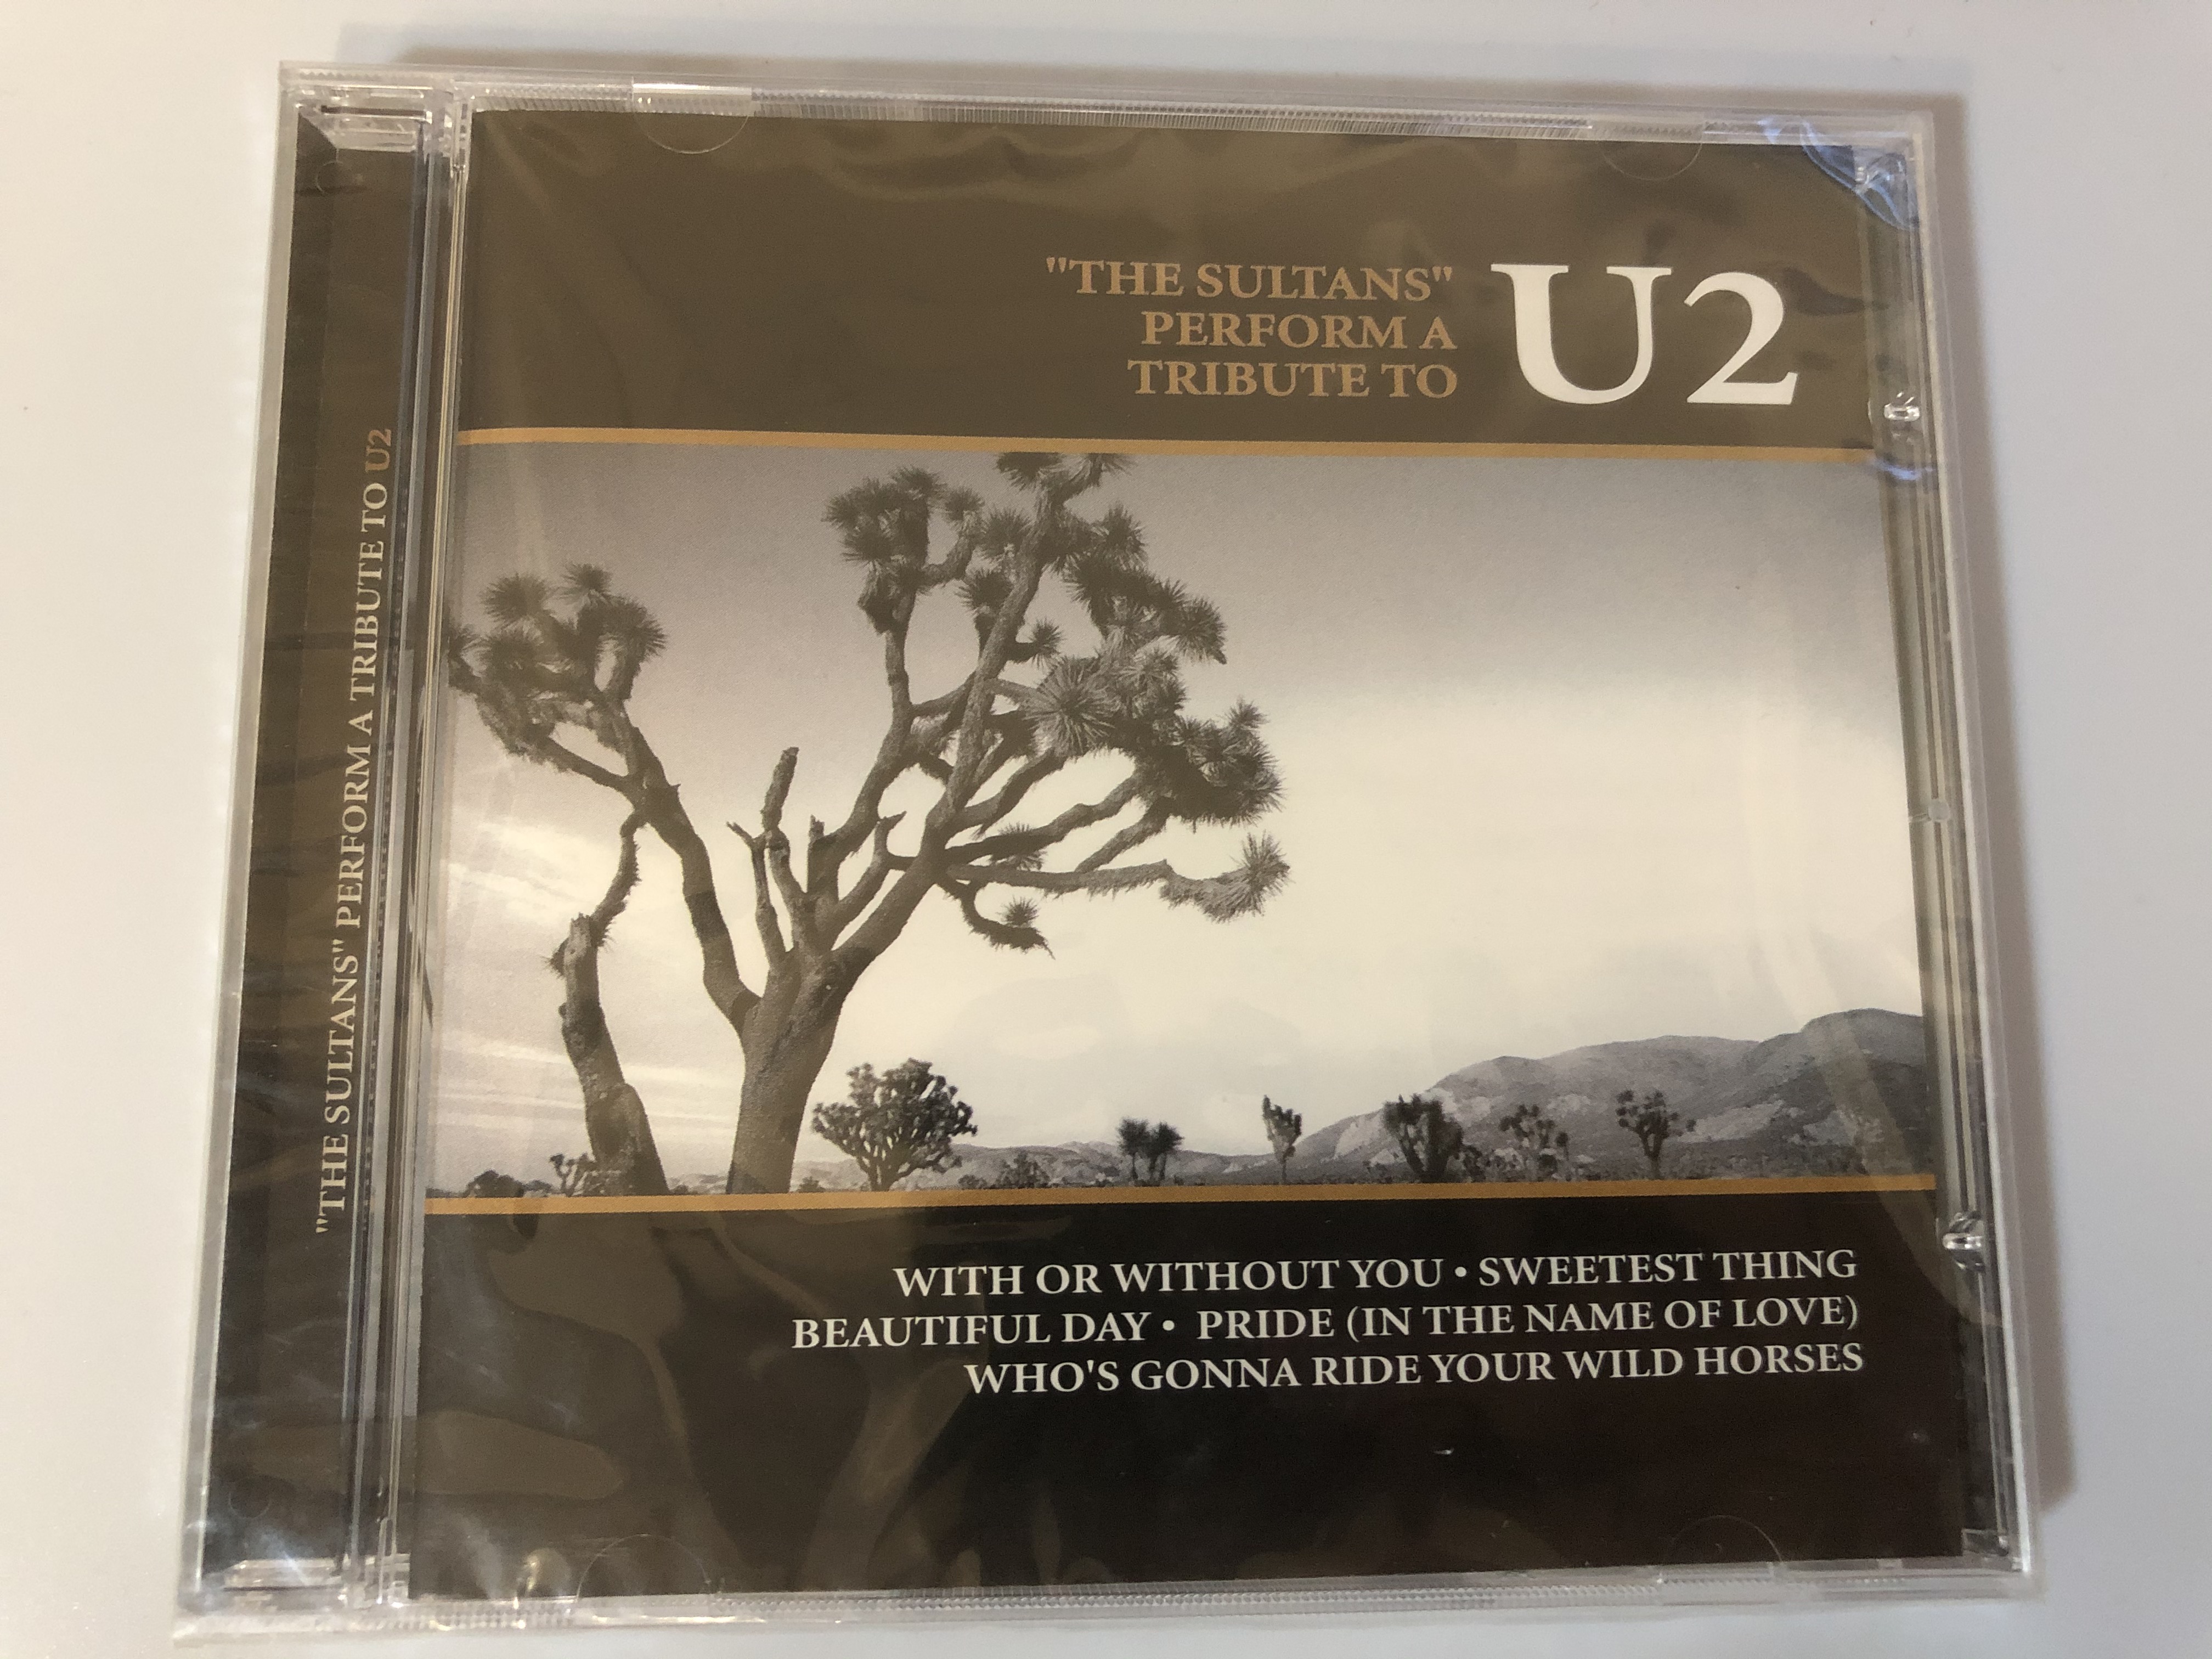 -the-sultans-perform-a-tribute-to-u2-with-or-without-you-sweetest-thing-beautiful-day-pride-in-the-name-of-love-who-s-gonna-ride-your-wild-horses-time-international-limited-audio-cd-1-.jpg